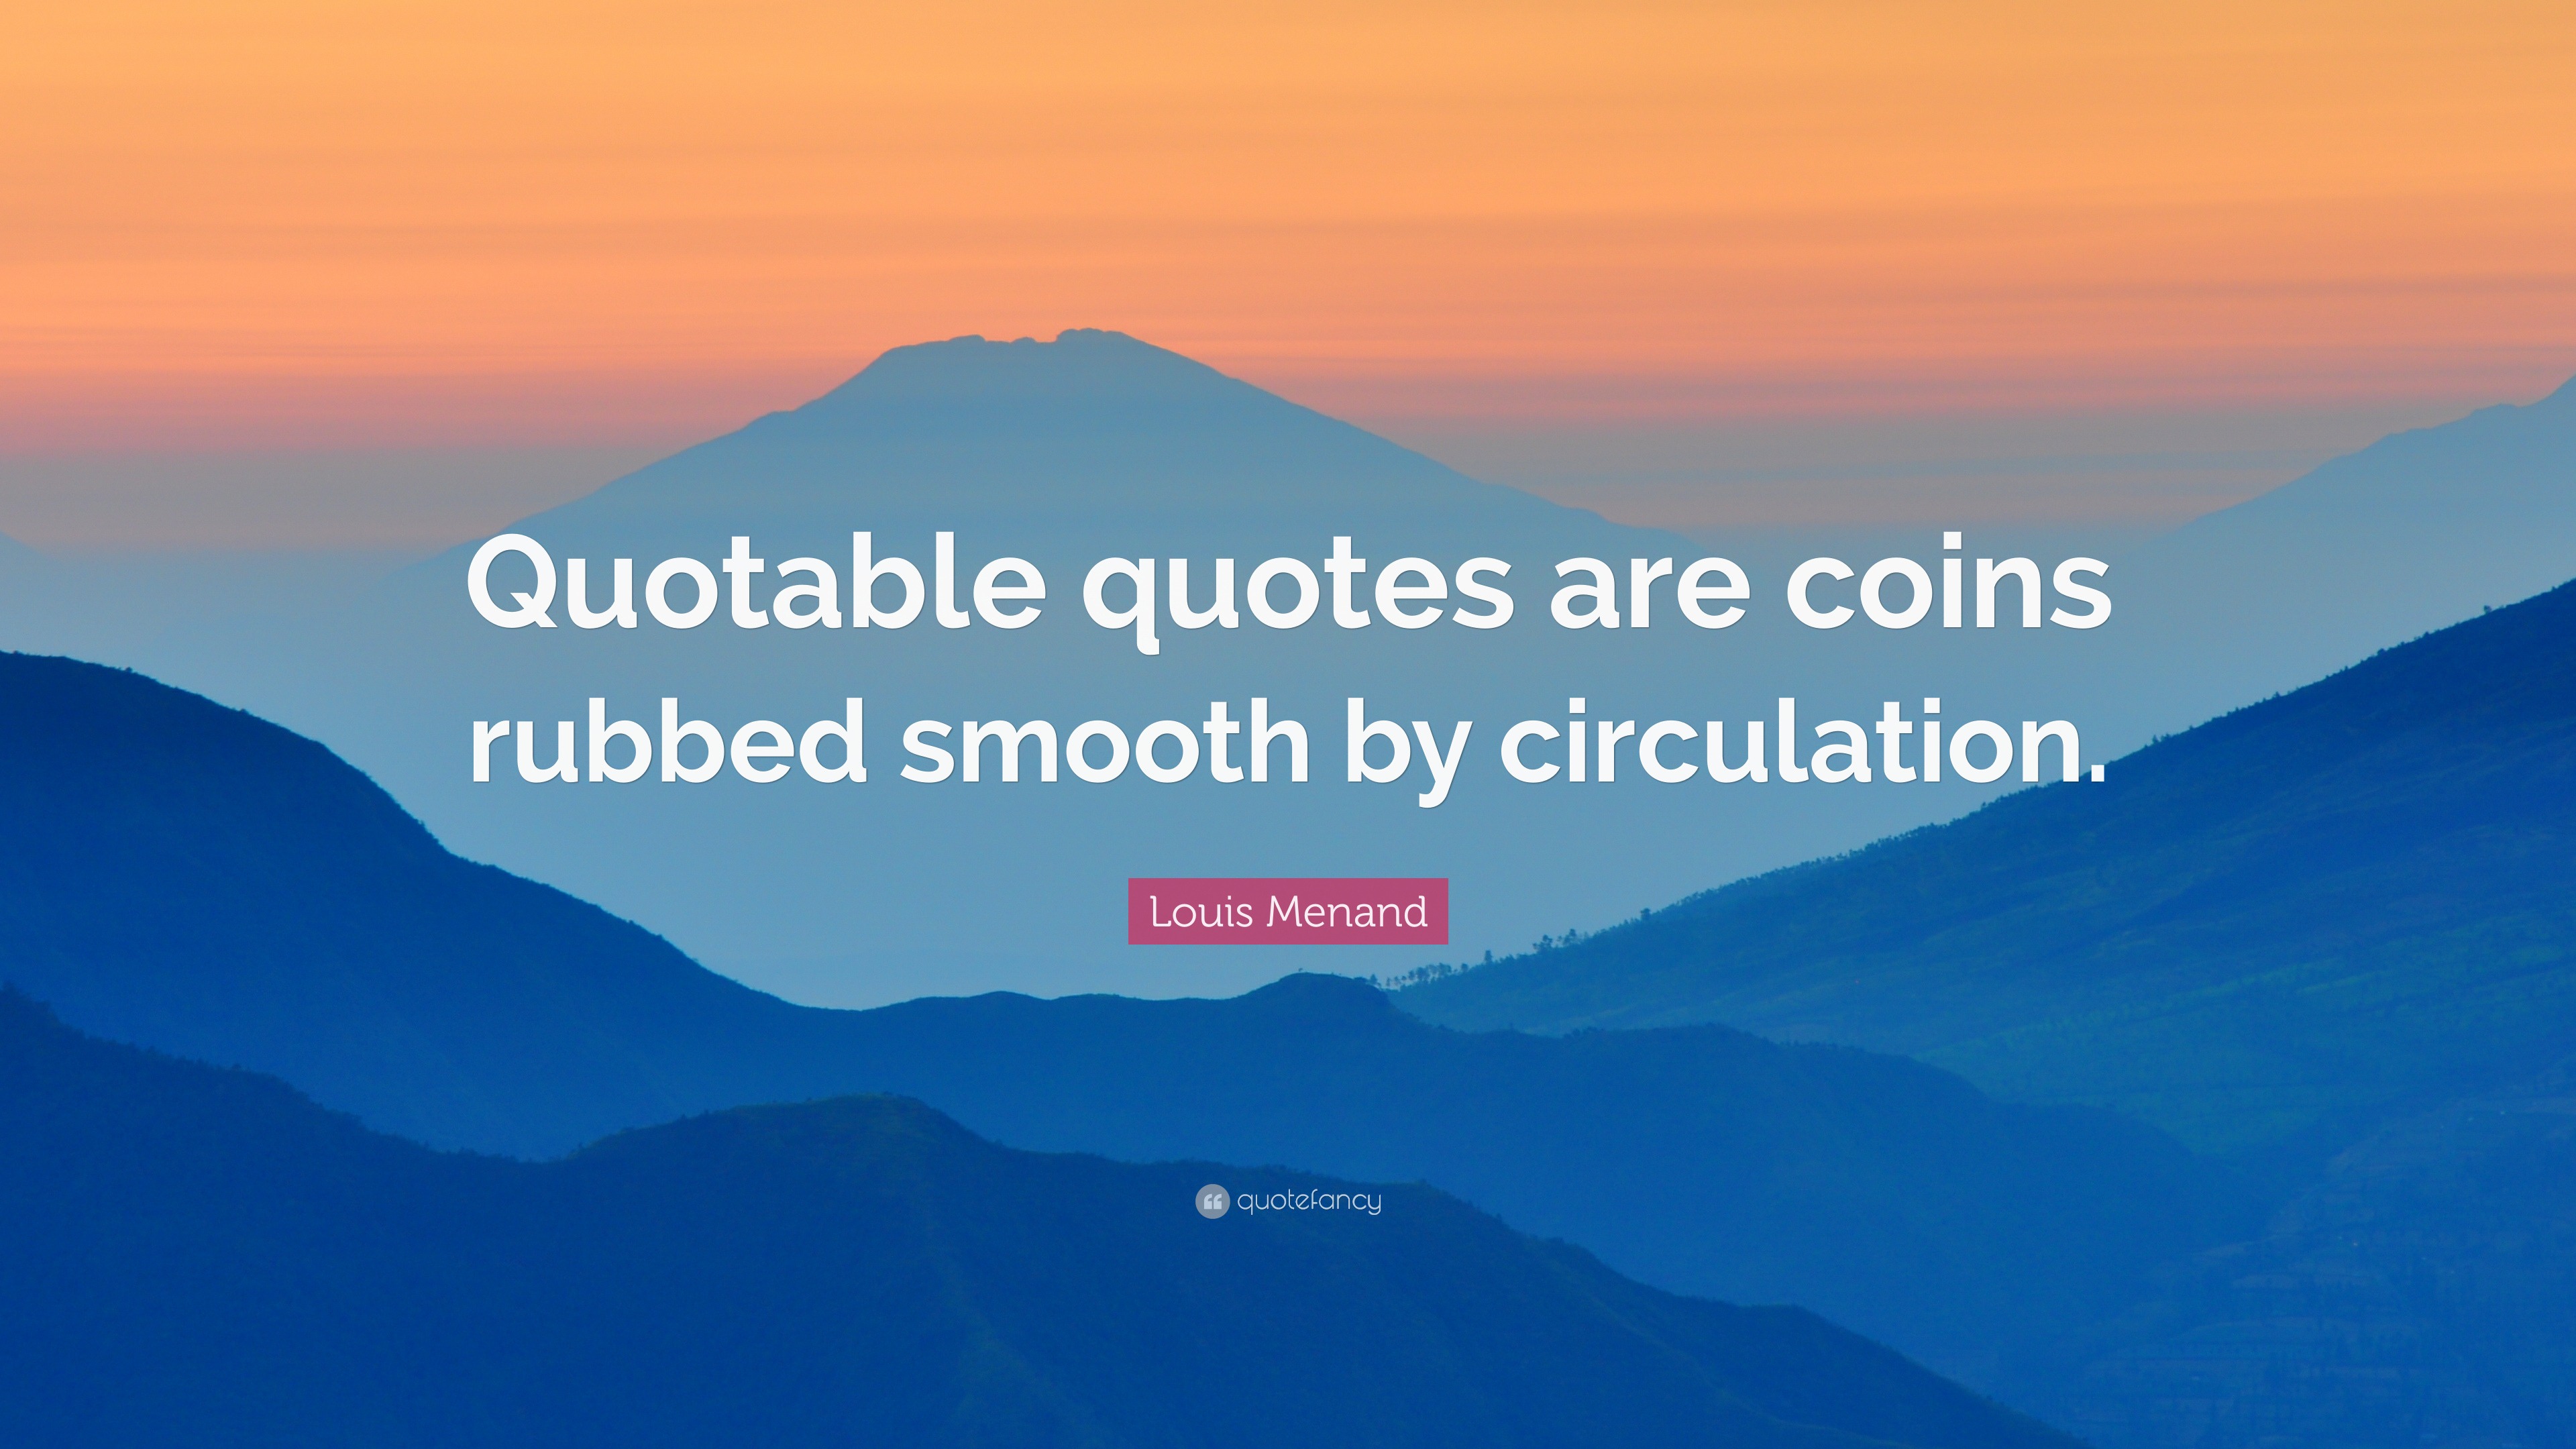 Louis Menand Quote: “Quotable quotes are coins rubbed smooth by circulation.” (7 wallpapers ...